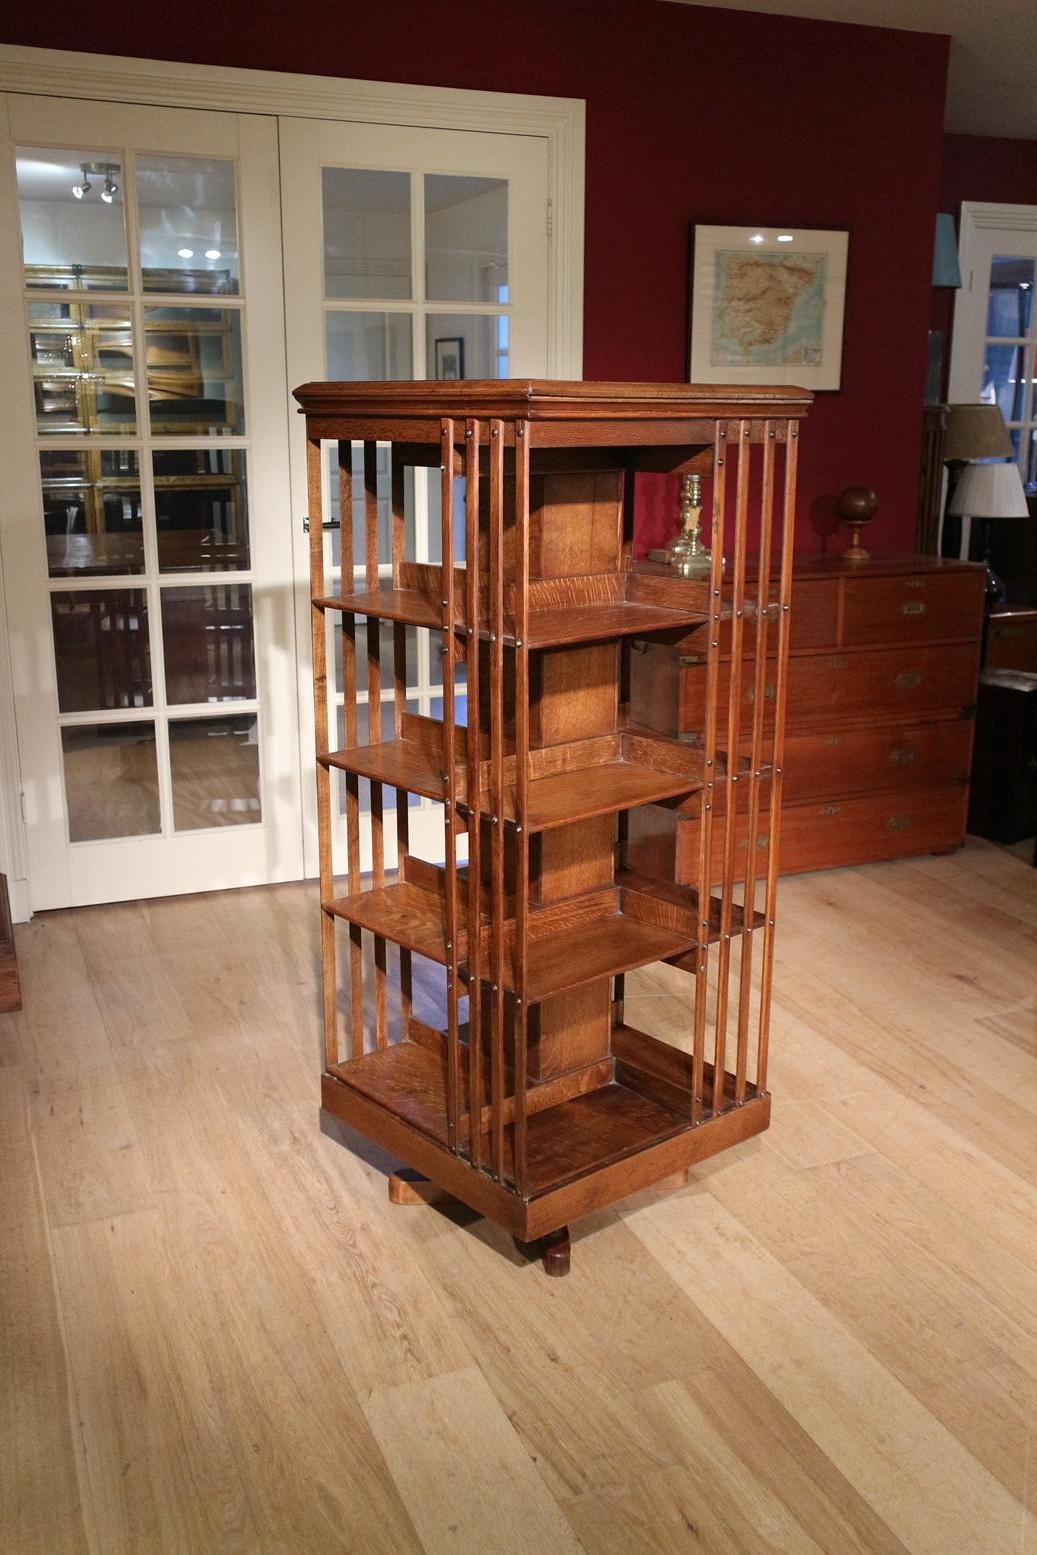 Large antique oak revolving bookcase 4 layers. Stable due to cast iron base. Entirely in very good condition.
Origin: England
Period: Approx. 1900
Size: 60cm x 60cm x 145cm.